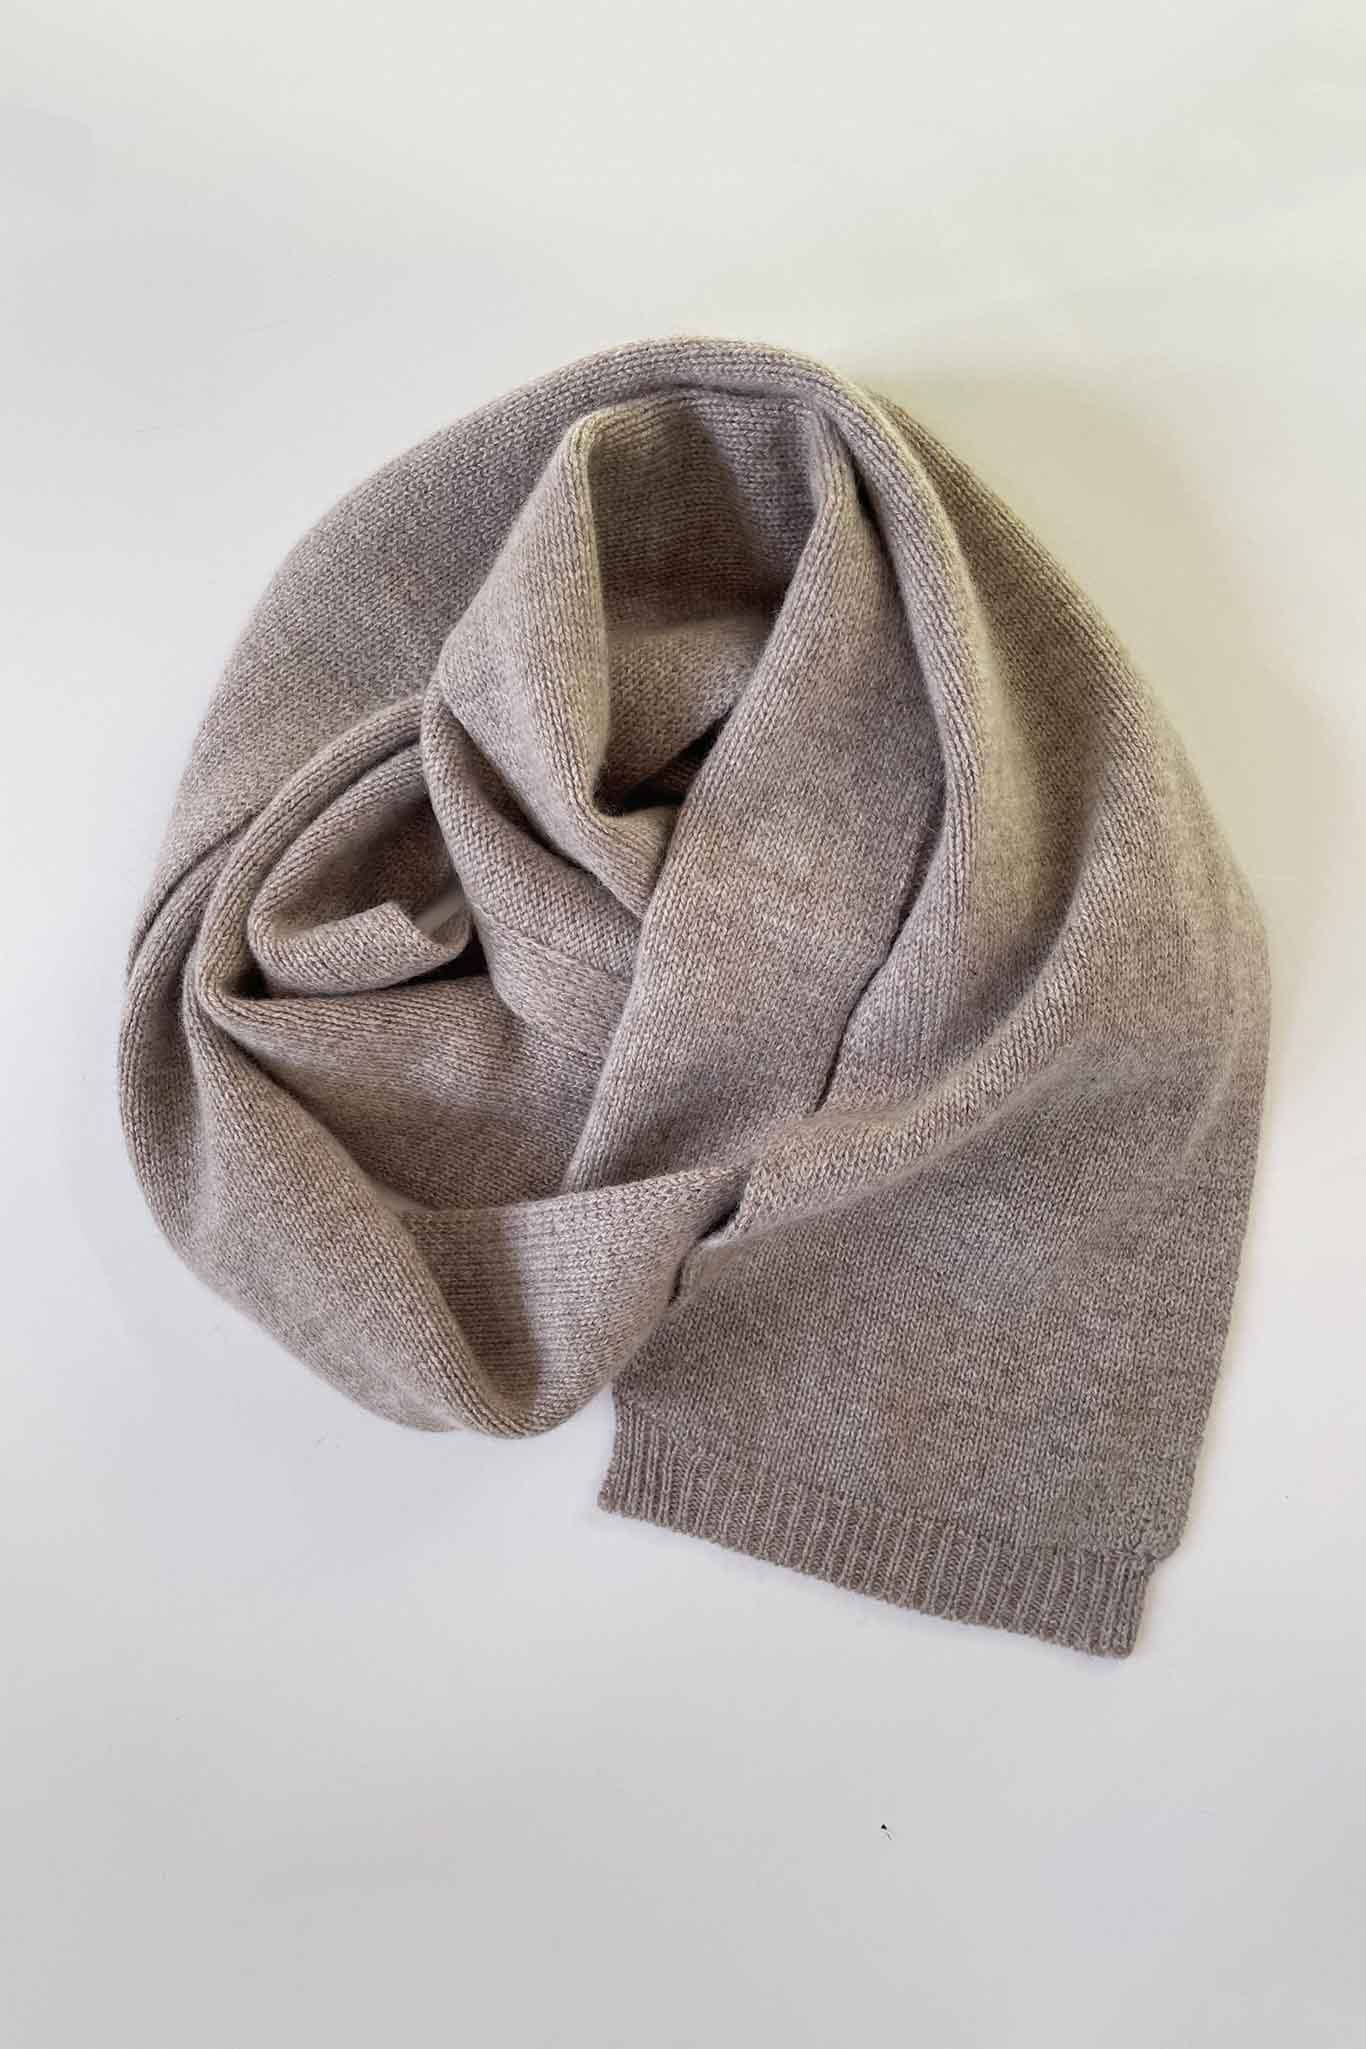 100% mongolian cashmere scarf made in Nepal